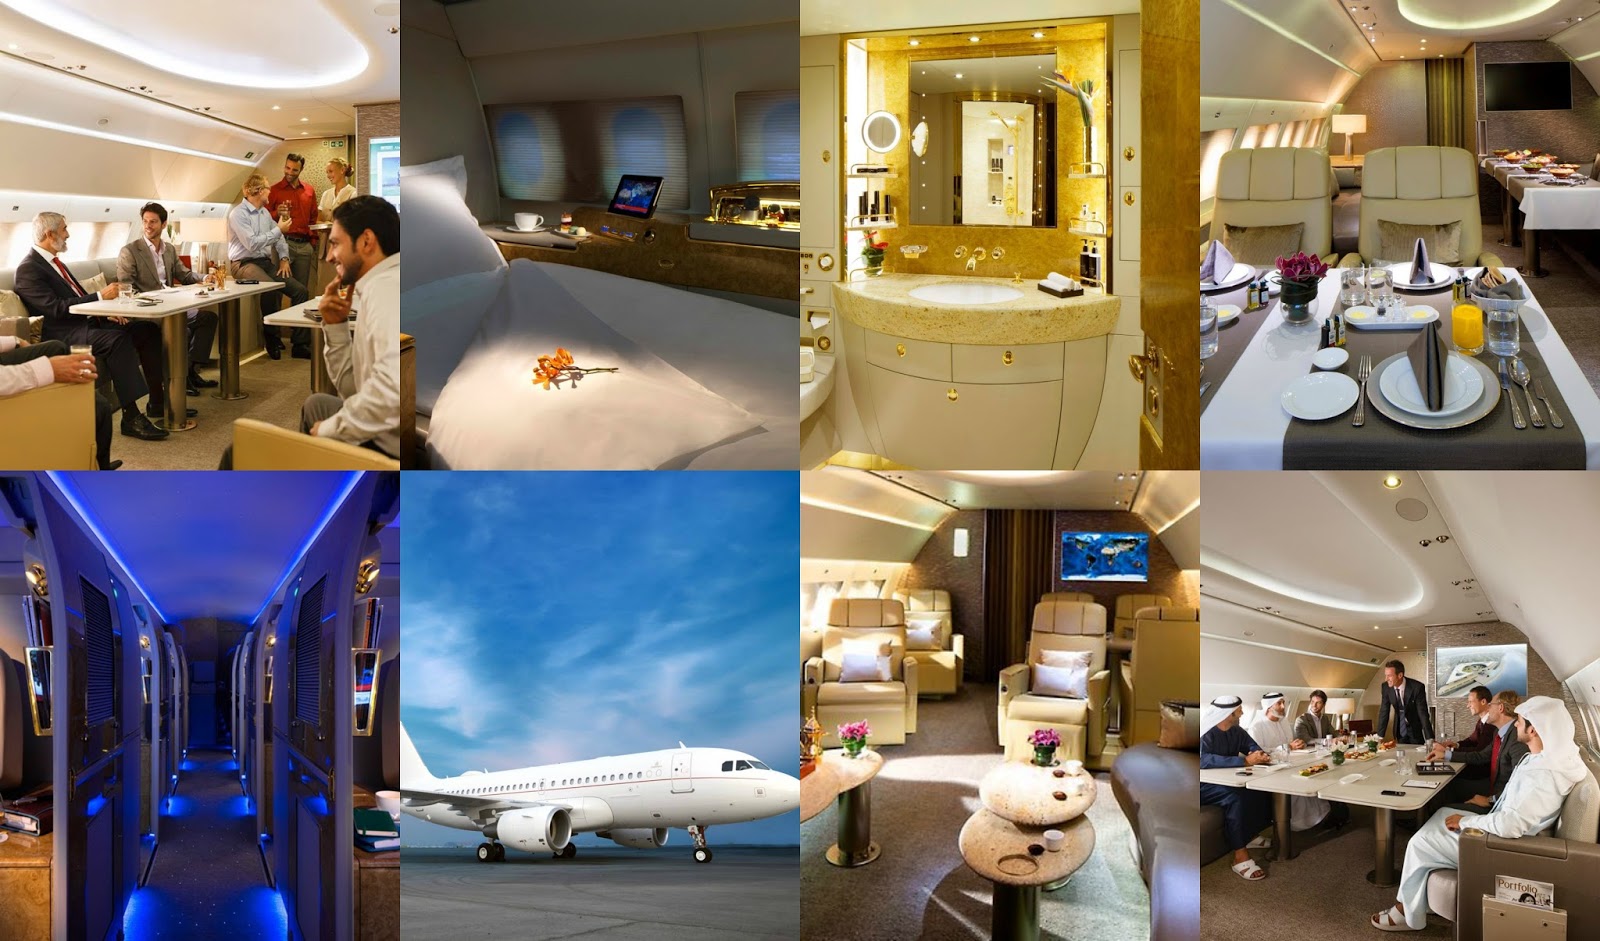 Emirates has a private jet and it is so luxurious that it makes